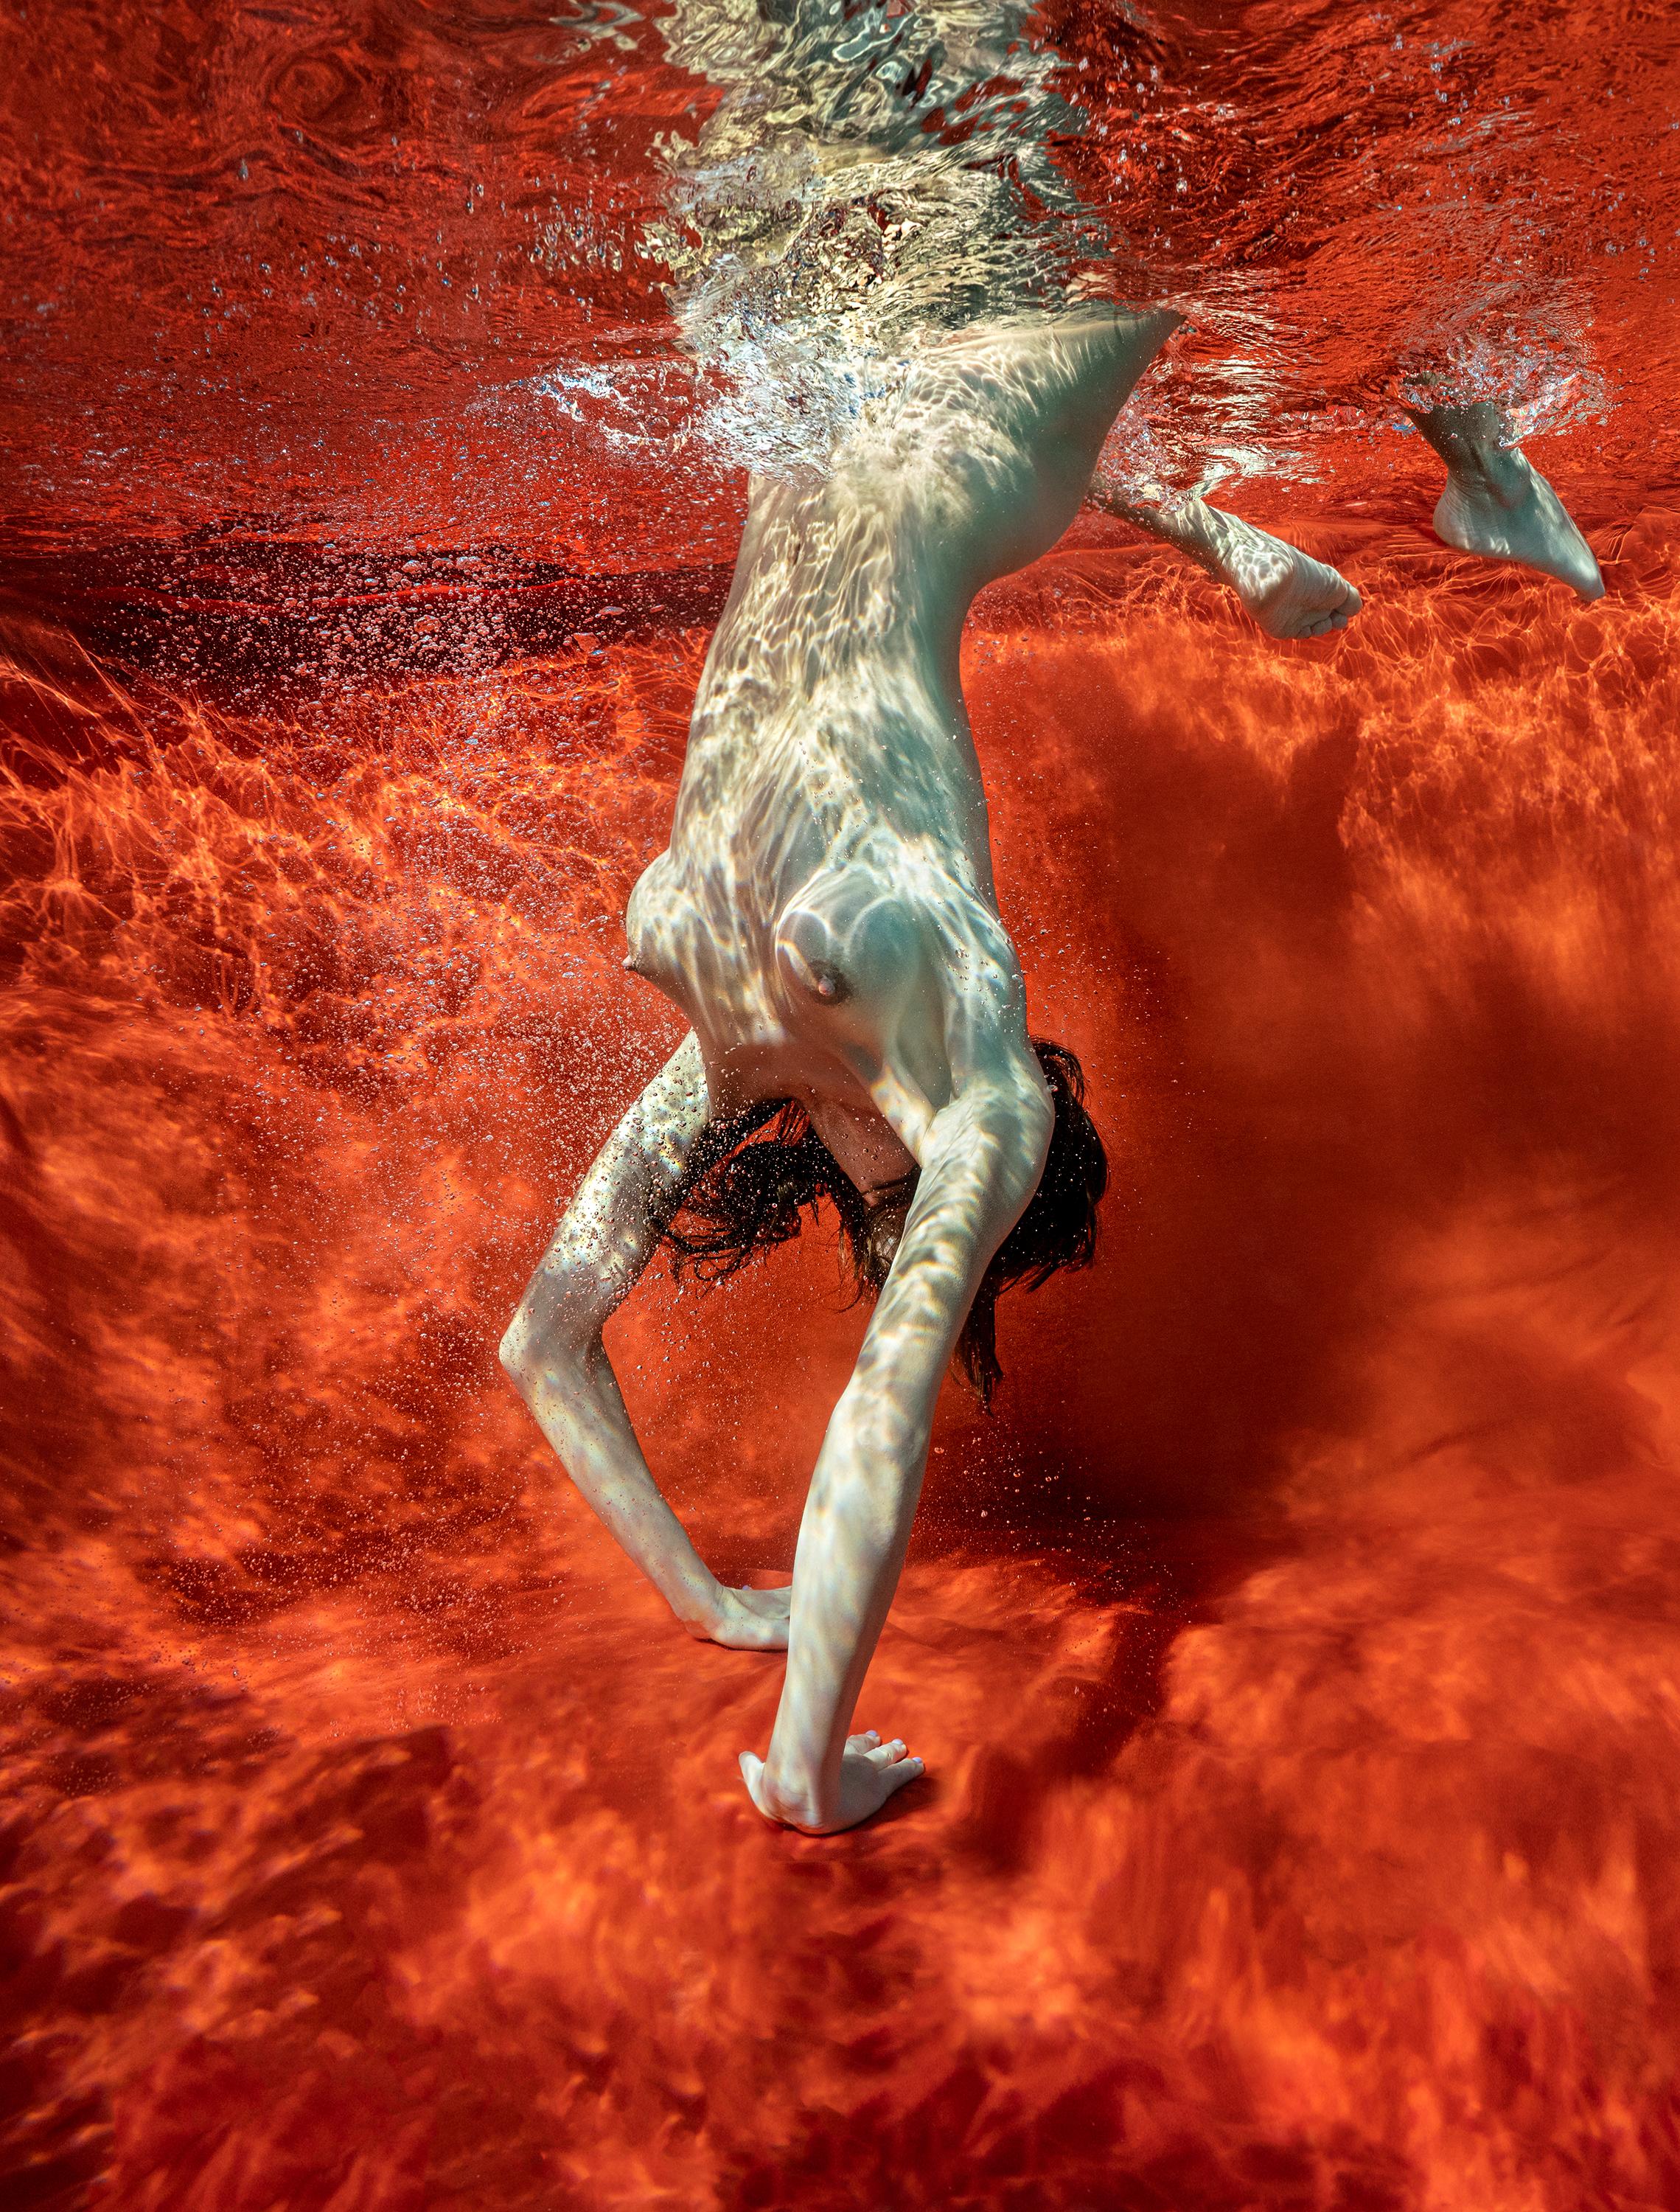 Alex Sher Nude Photograph - Blood and Milk VIII - underwater nude photograph - archival pigment 35x26"